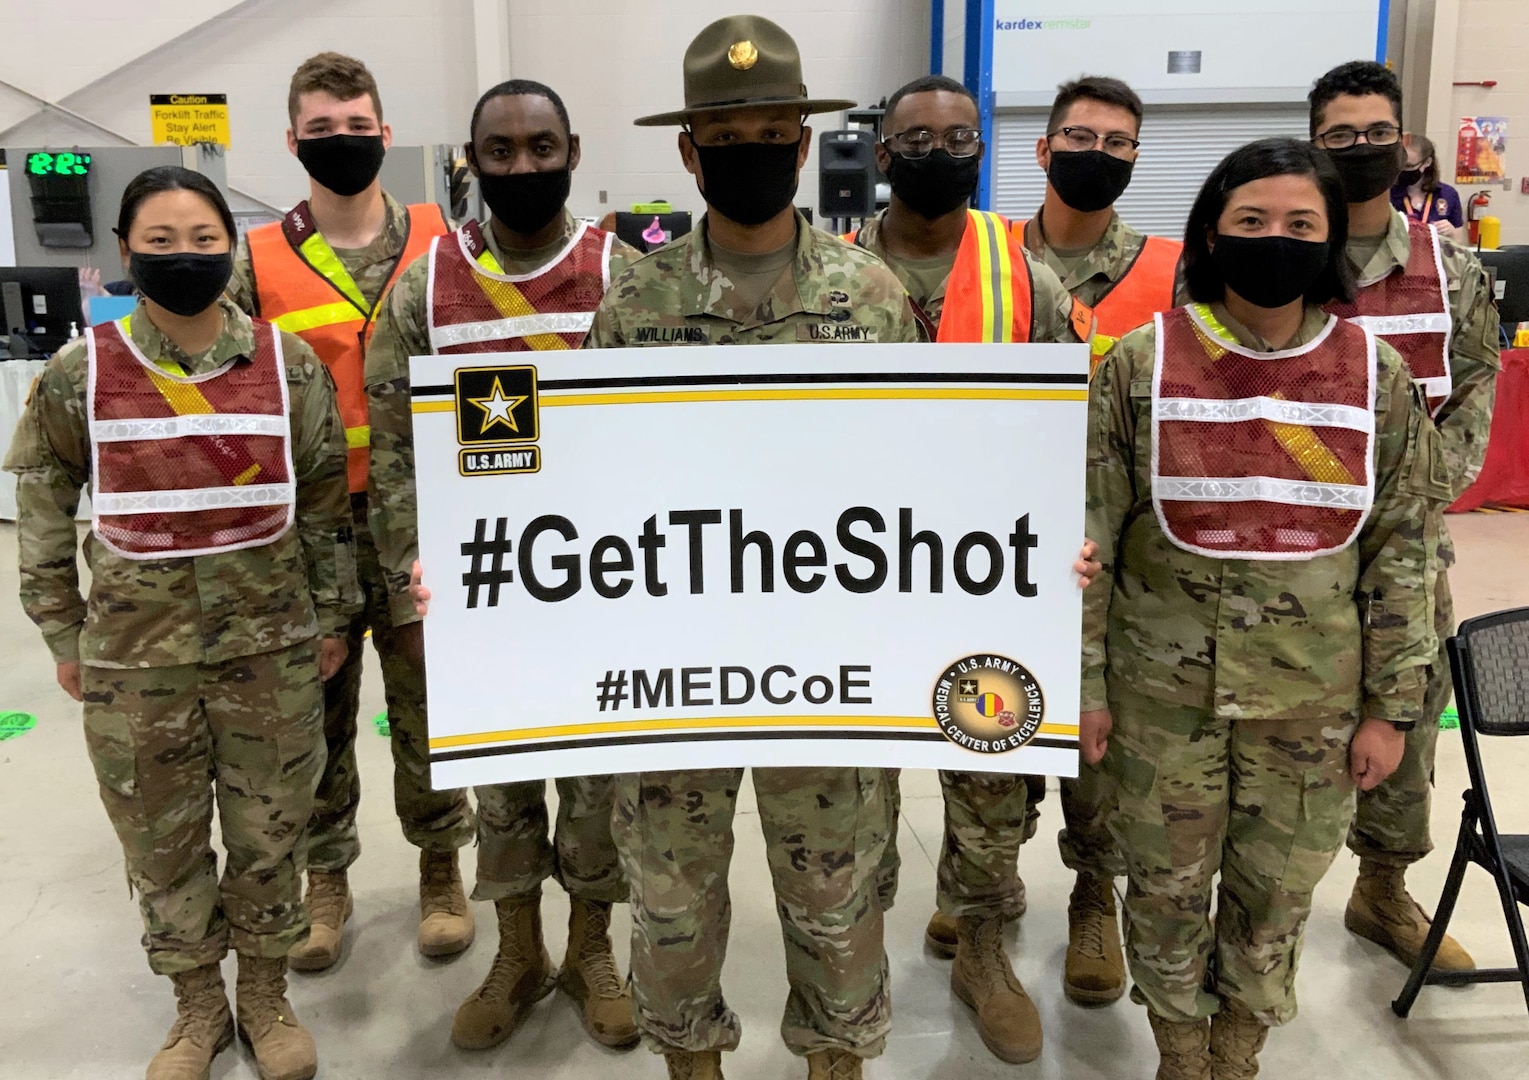 Staff Sgt. Marcus Williamson (center), a Drill Sergeant and 68J Medical Logistics Specialist assigned to Company C, 264th Medical Battalion, 32nd Medical Brigade, U.S. Army Medical Center of Excellence, or MEDCoE, pictured at the Brooke Army Medical Center’s Joint Base San Antonio-Fort Sam Houston Vaccine site with 68C Practical Nursing Specialists augmenting BAMC personnel to administer the Pfizer BioNTech COVID-19 vaccine April 15.